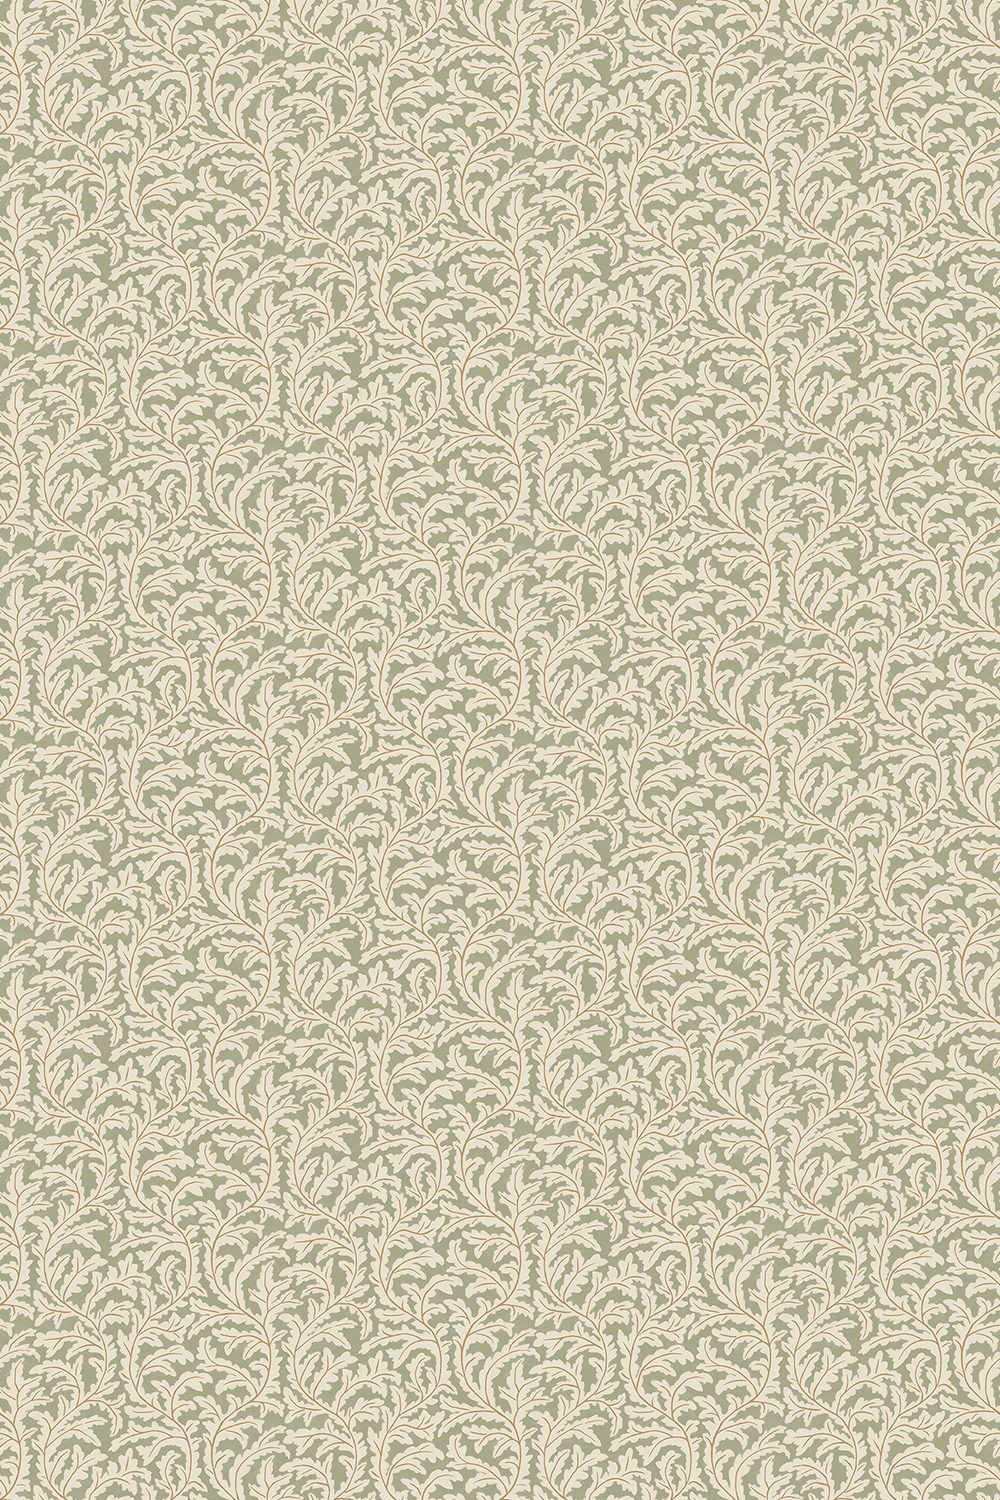 Frond Ogee Wallpaper - Brookes Green and Edge Sand